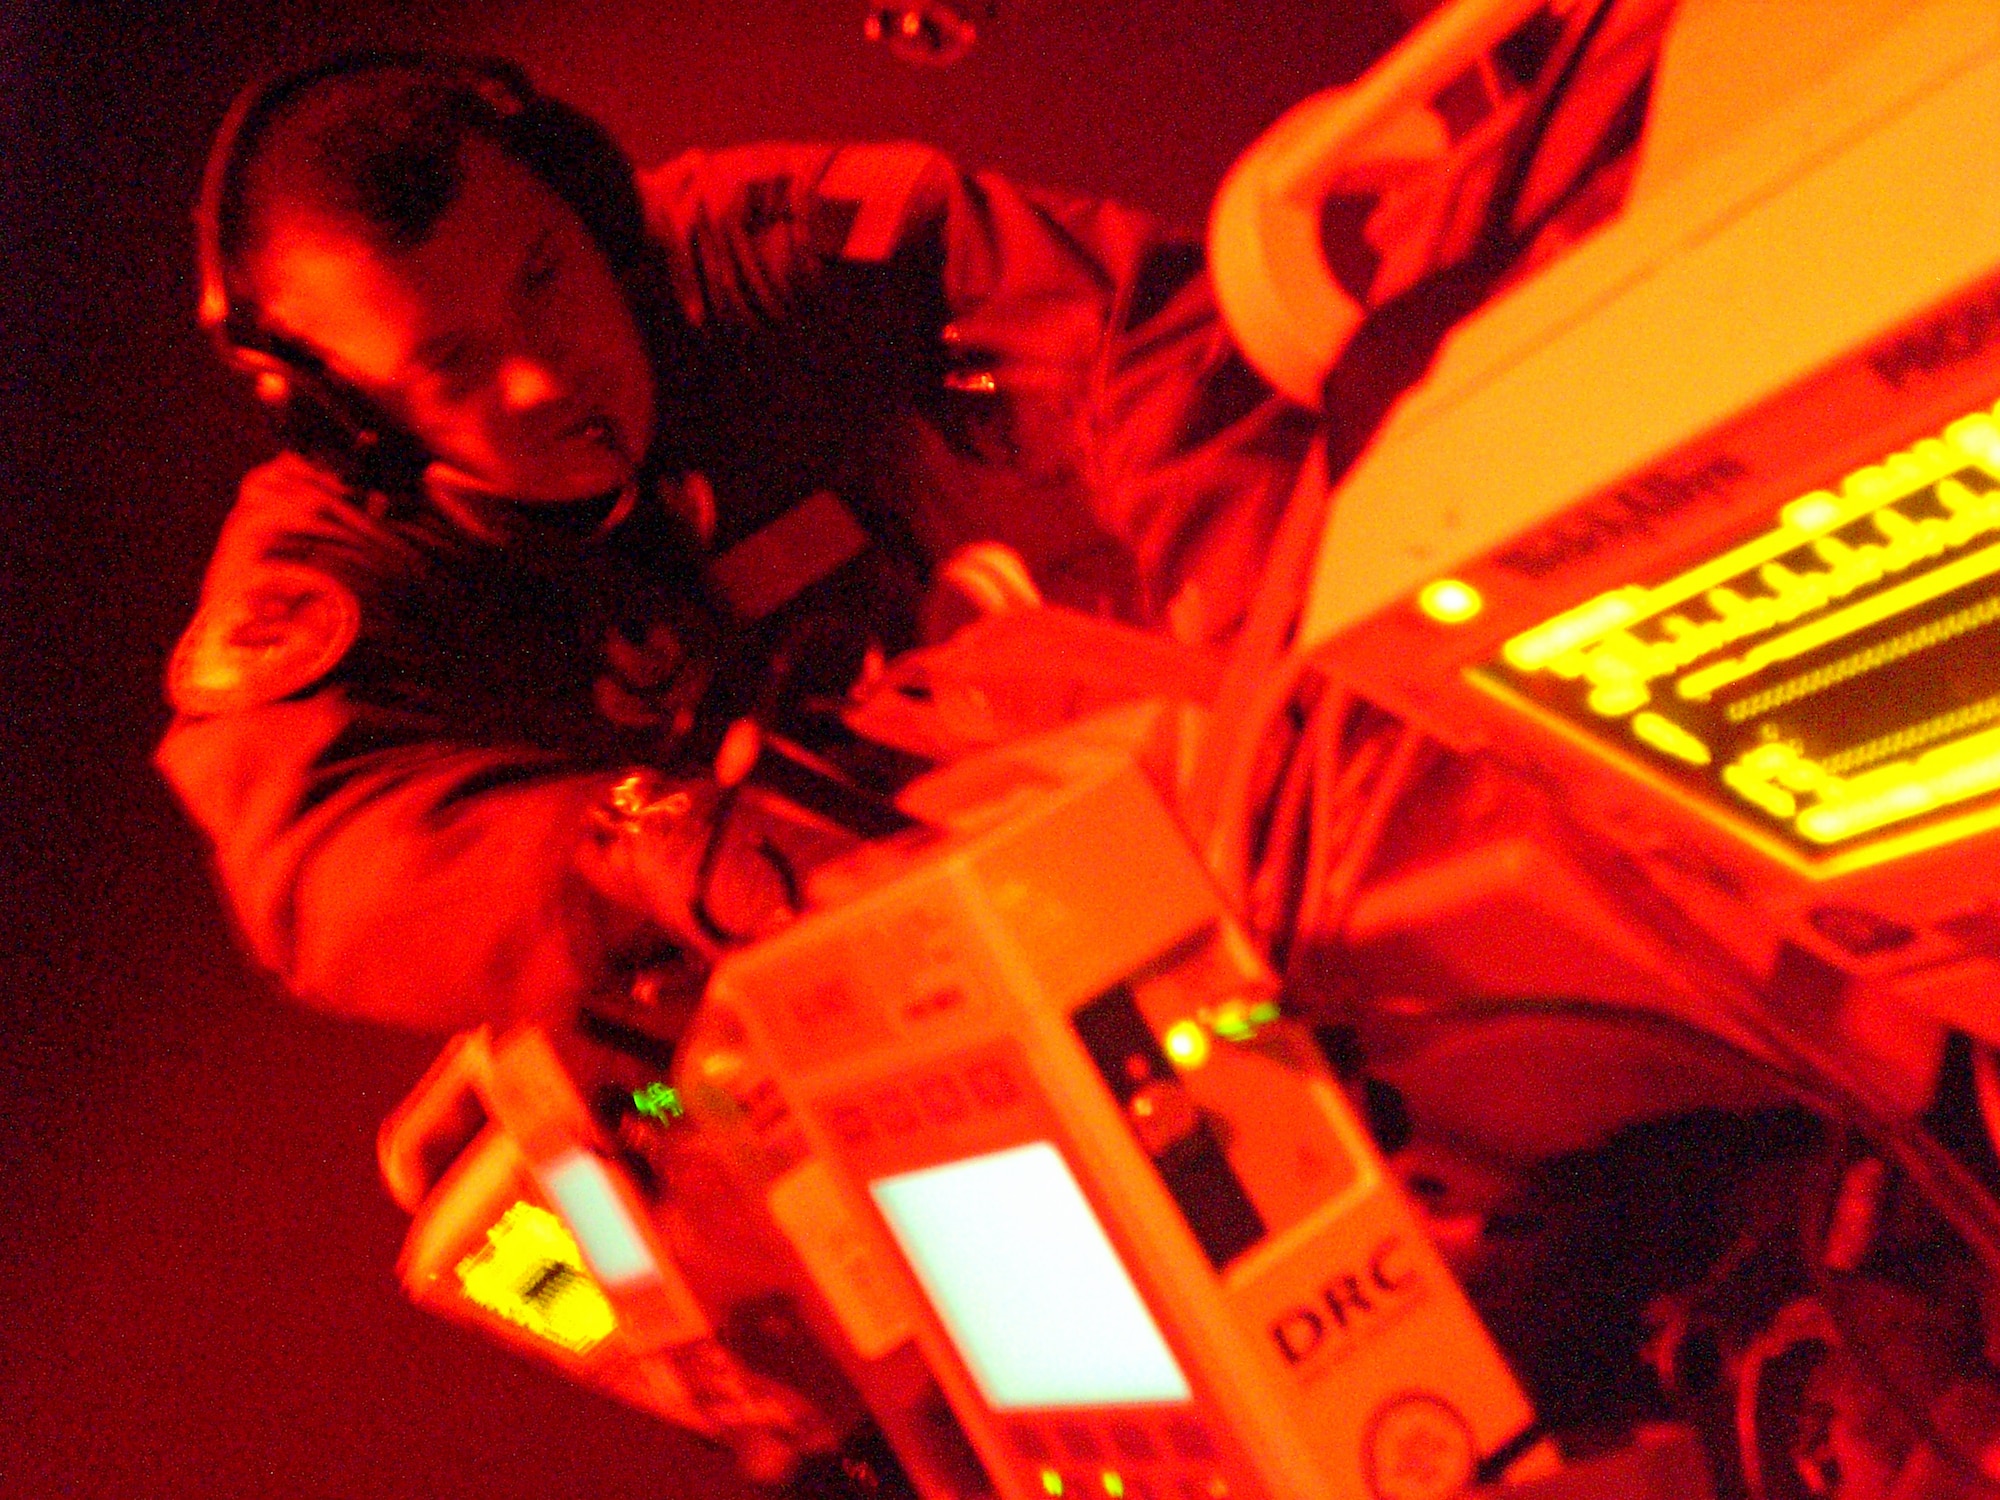 Operating in the dim red glow simulating the back of a C-130 in flight, Capt. Derek Brumley checks equipment monitoring a critical care “patient.”  Capt. Brumley, a native of Barstow, Calif., is a critical care nurse and an instructor for the Air Force’s Centers for Sustainment of Trauma and Readiness Skills (CSTARS) at University Hospital Cincinnati, which trains Air Force critical care air transport team members. (U.S. Air Force photo/Derek Kaufman)